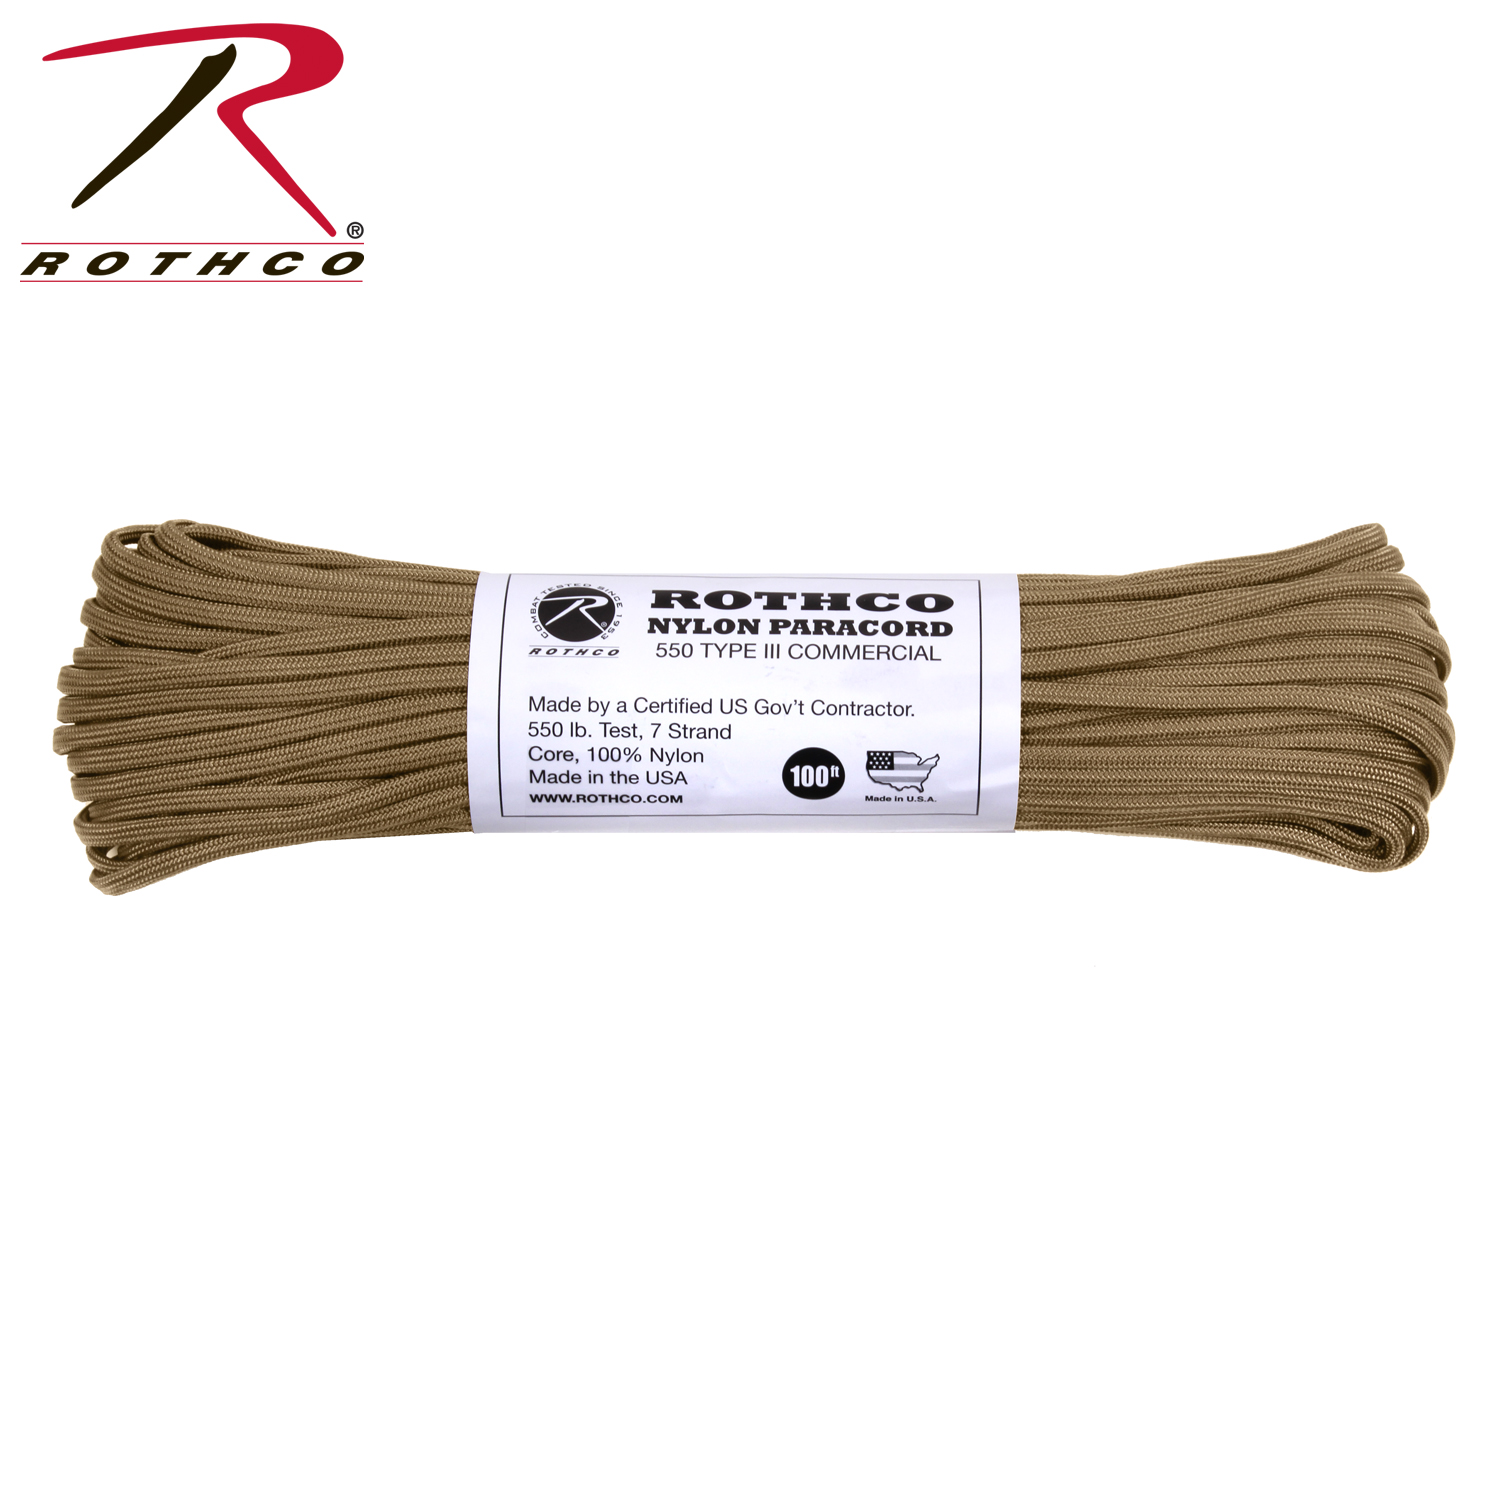 PARACORD PLANET Nylon Military Paracord 550 lbs Type III 7 Strand Utility  Cord Rope USA Made 